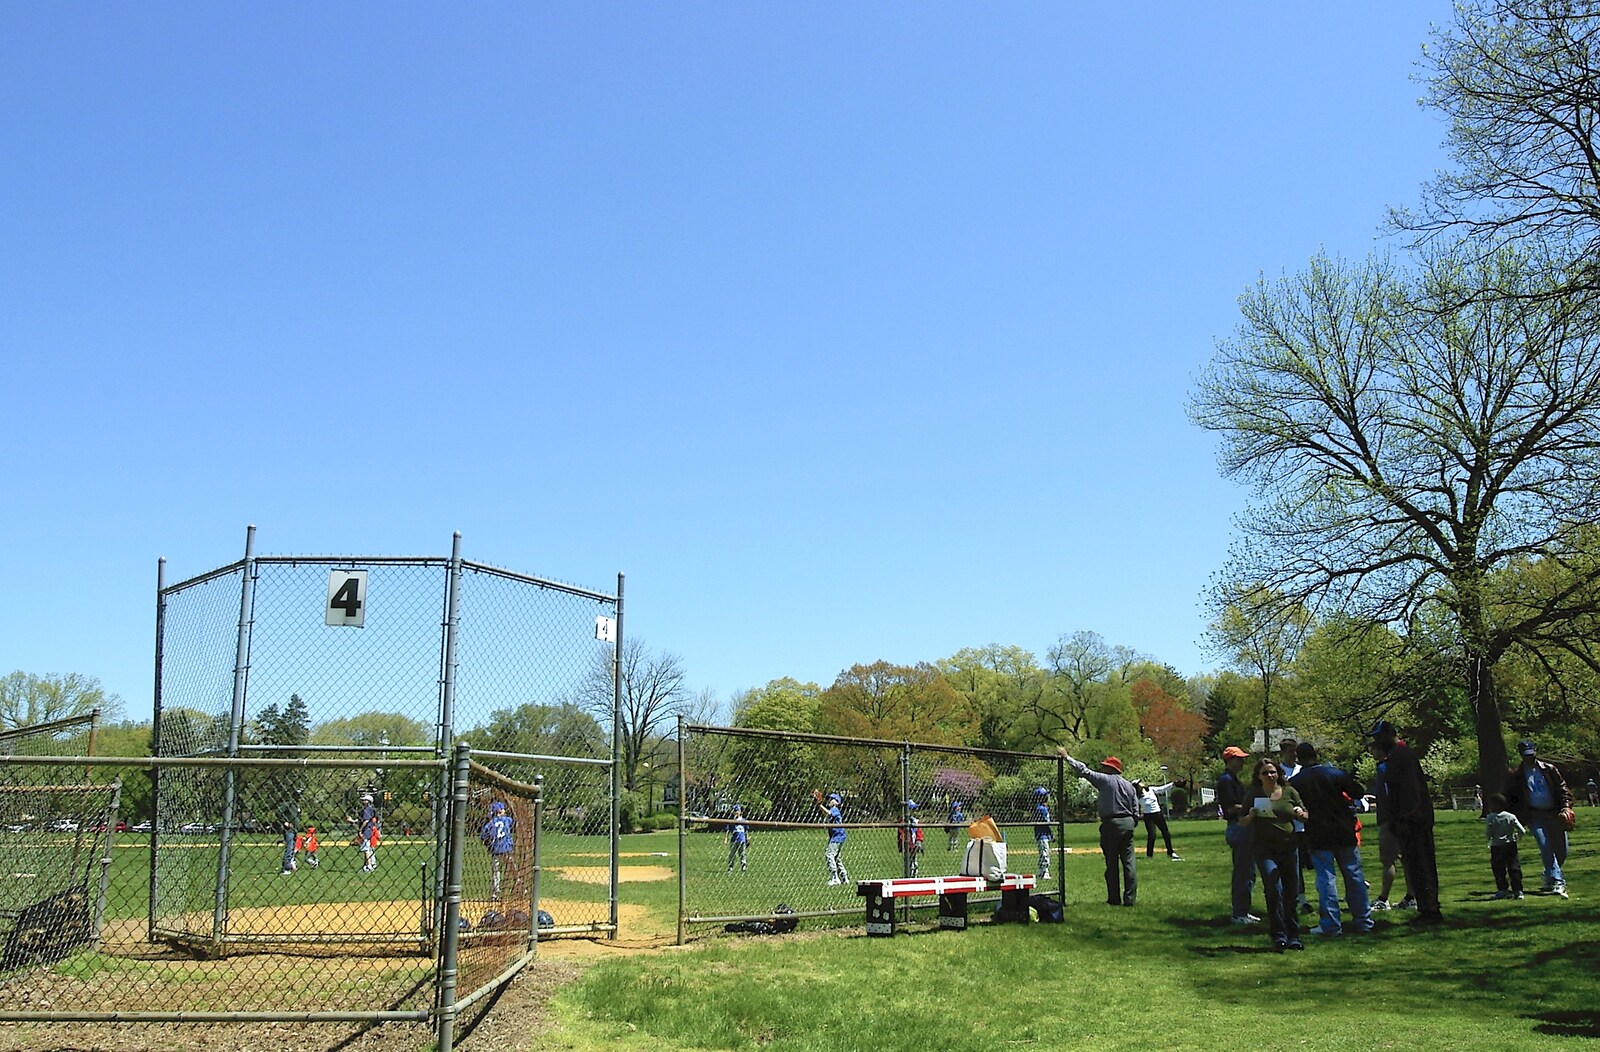 The baseball field from Maplewood and Little-League Baseball, New Jersey - 29th April 2006